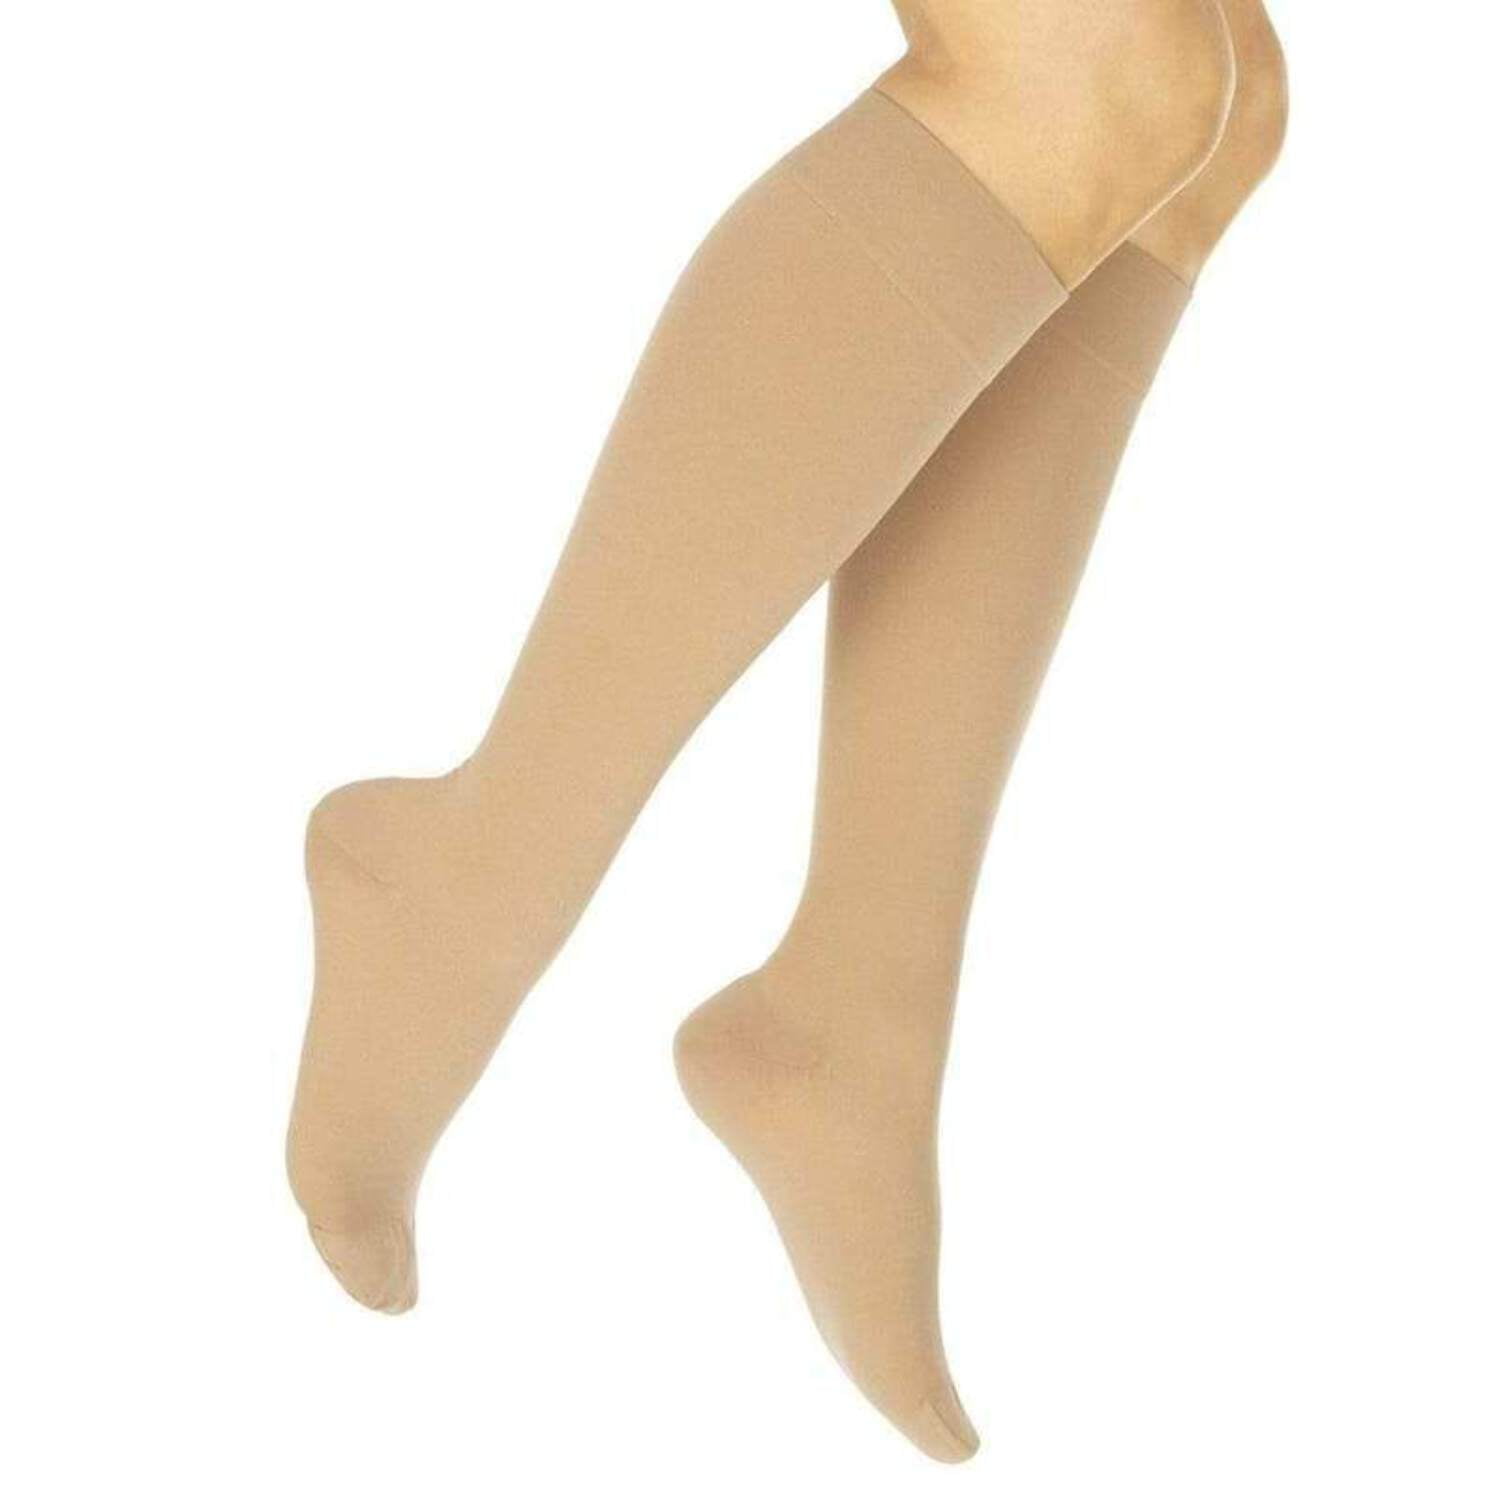 Vive Medical Compression Stockings - 15-20 mmHg Knee-High Sock for Varicose  Veins, Post Surgery, Swelling, Soreness, Women & Men 